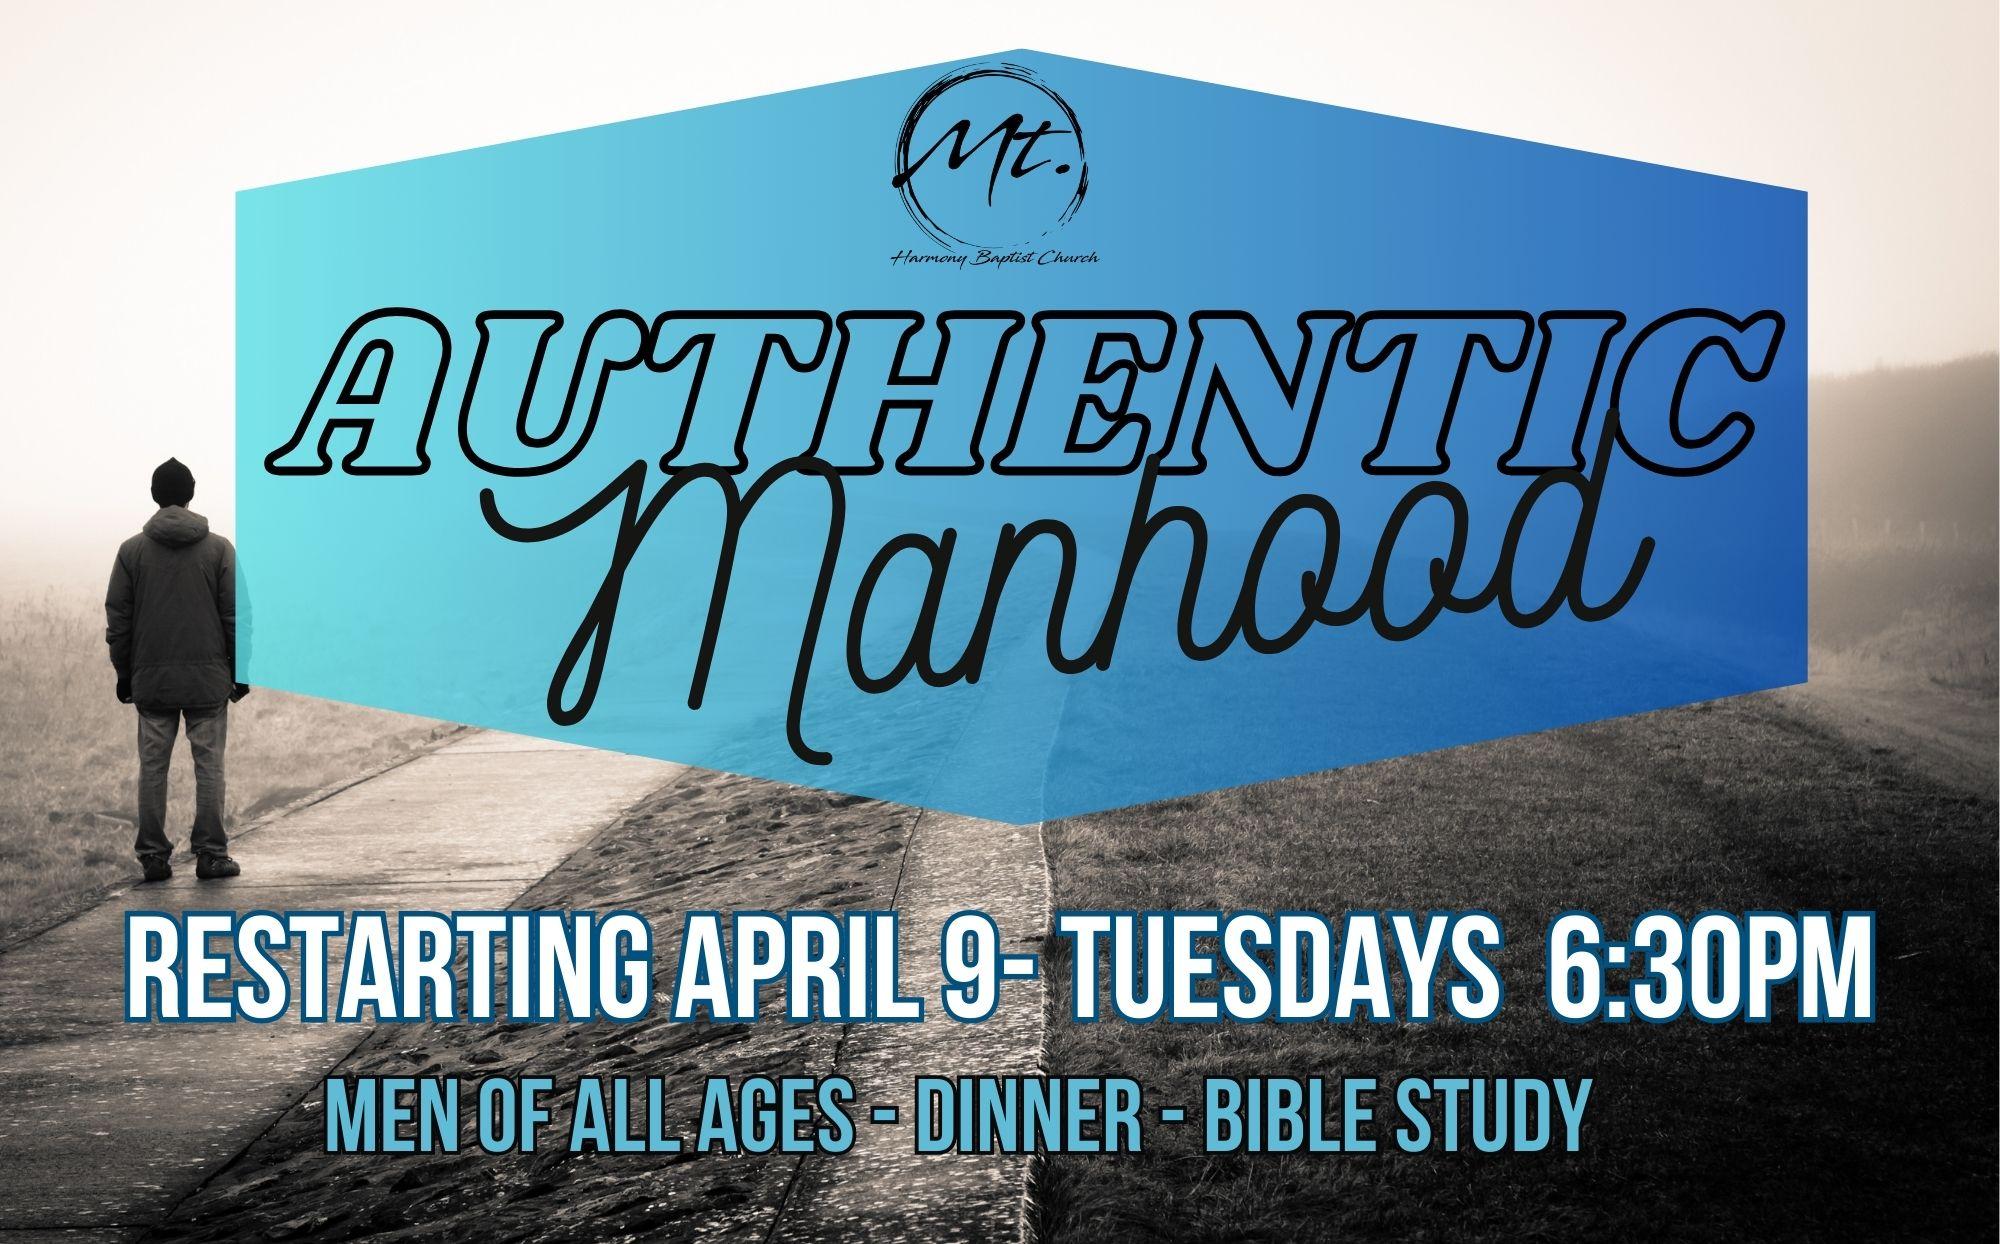 Men's Bible Study called Authentic Manhood will be restarting Tues, April 9th at 6:30pm.